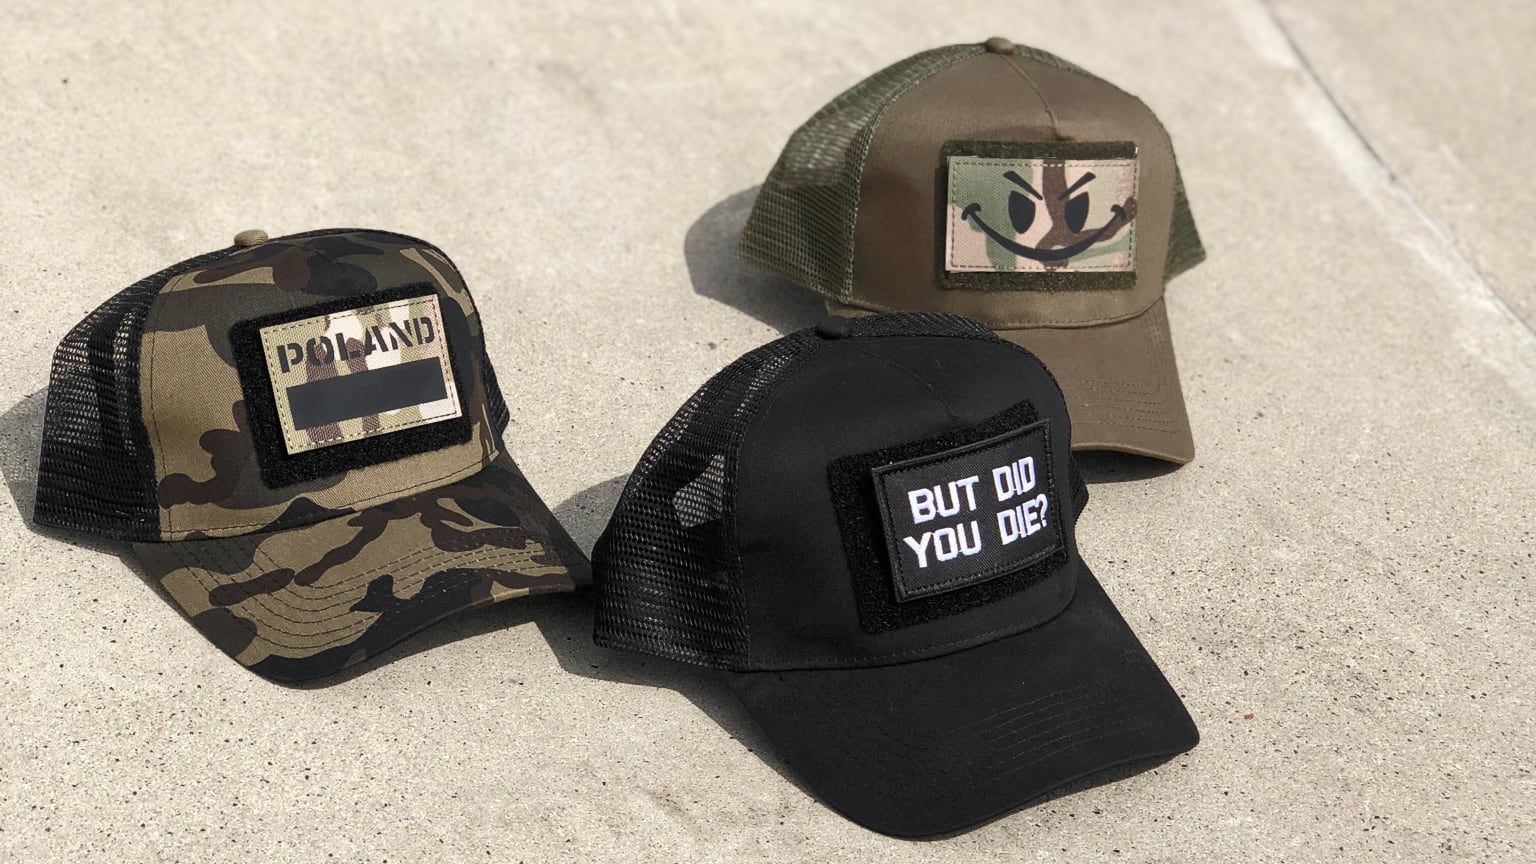 Trucker snapback caps in various colors and patches